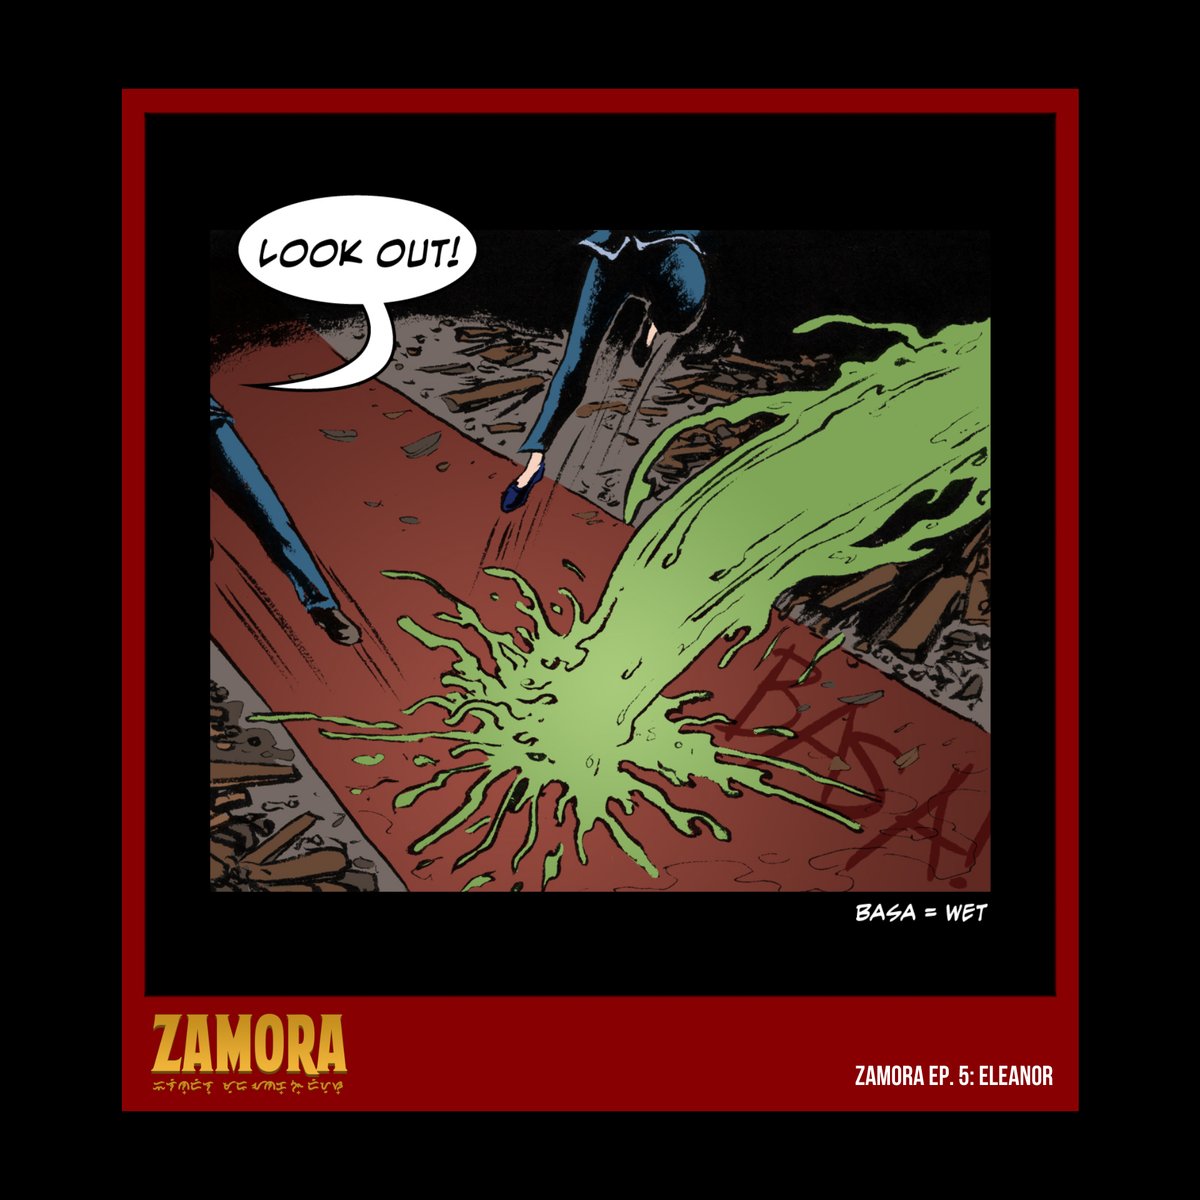 Zamora: Where supernatural forces collide with epic storytelling. Brace yourself for a comic experience that will leave you breathless! 
LINK IN BIO
#UnforgettableAdventure #webtoons #webtooncanvas #webcomics #comics #horror #cosmichorror #supernatural #occult #demon #action